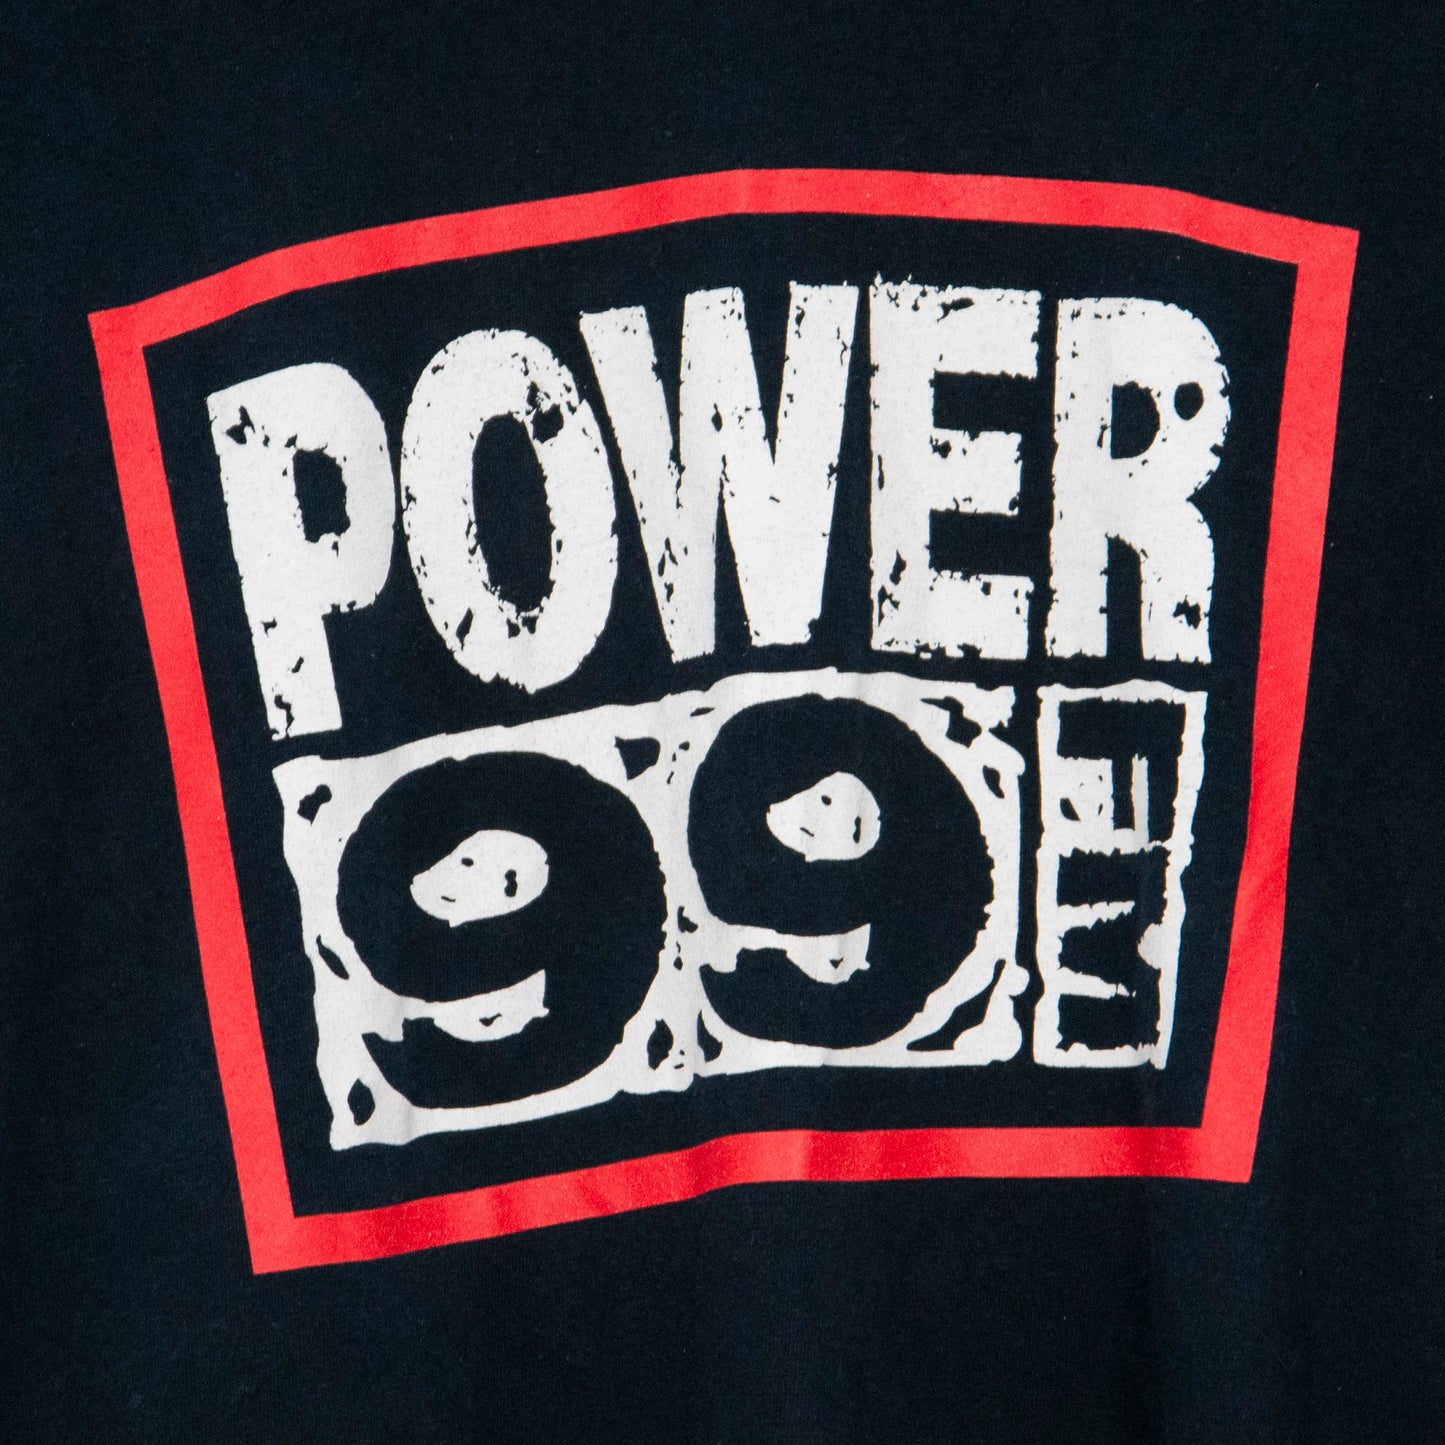 Vintage Power 99FM 'Stop The Violence' Long Sleeve XL